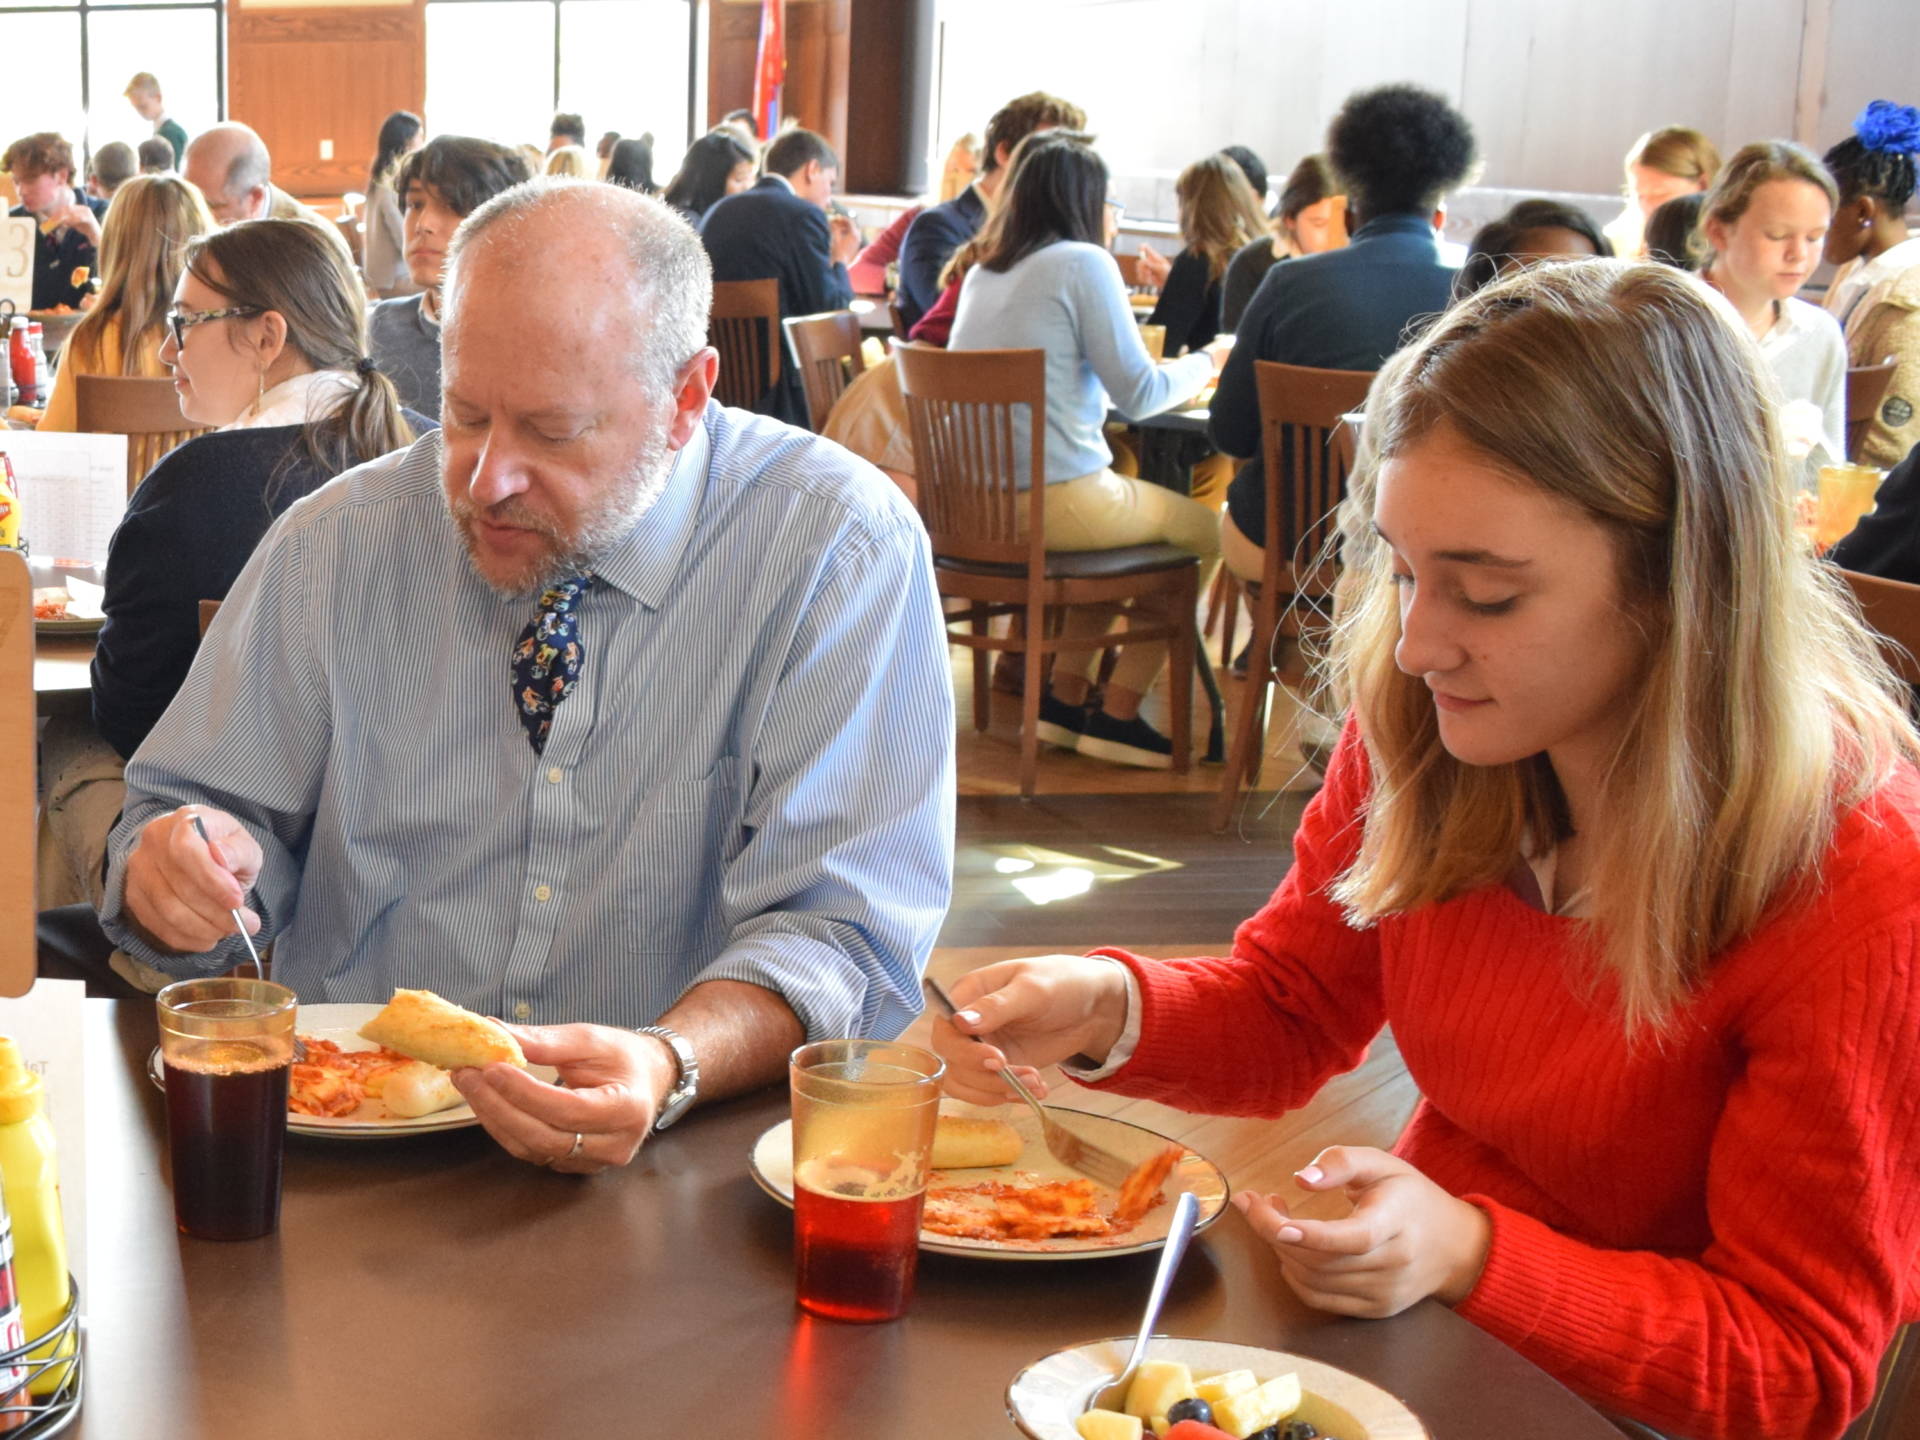 How Assigned Seats During Lunchtime Can Foster a Positive School Culture